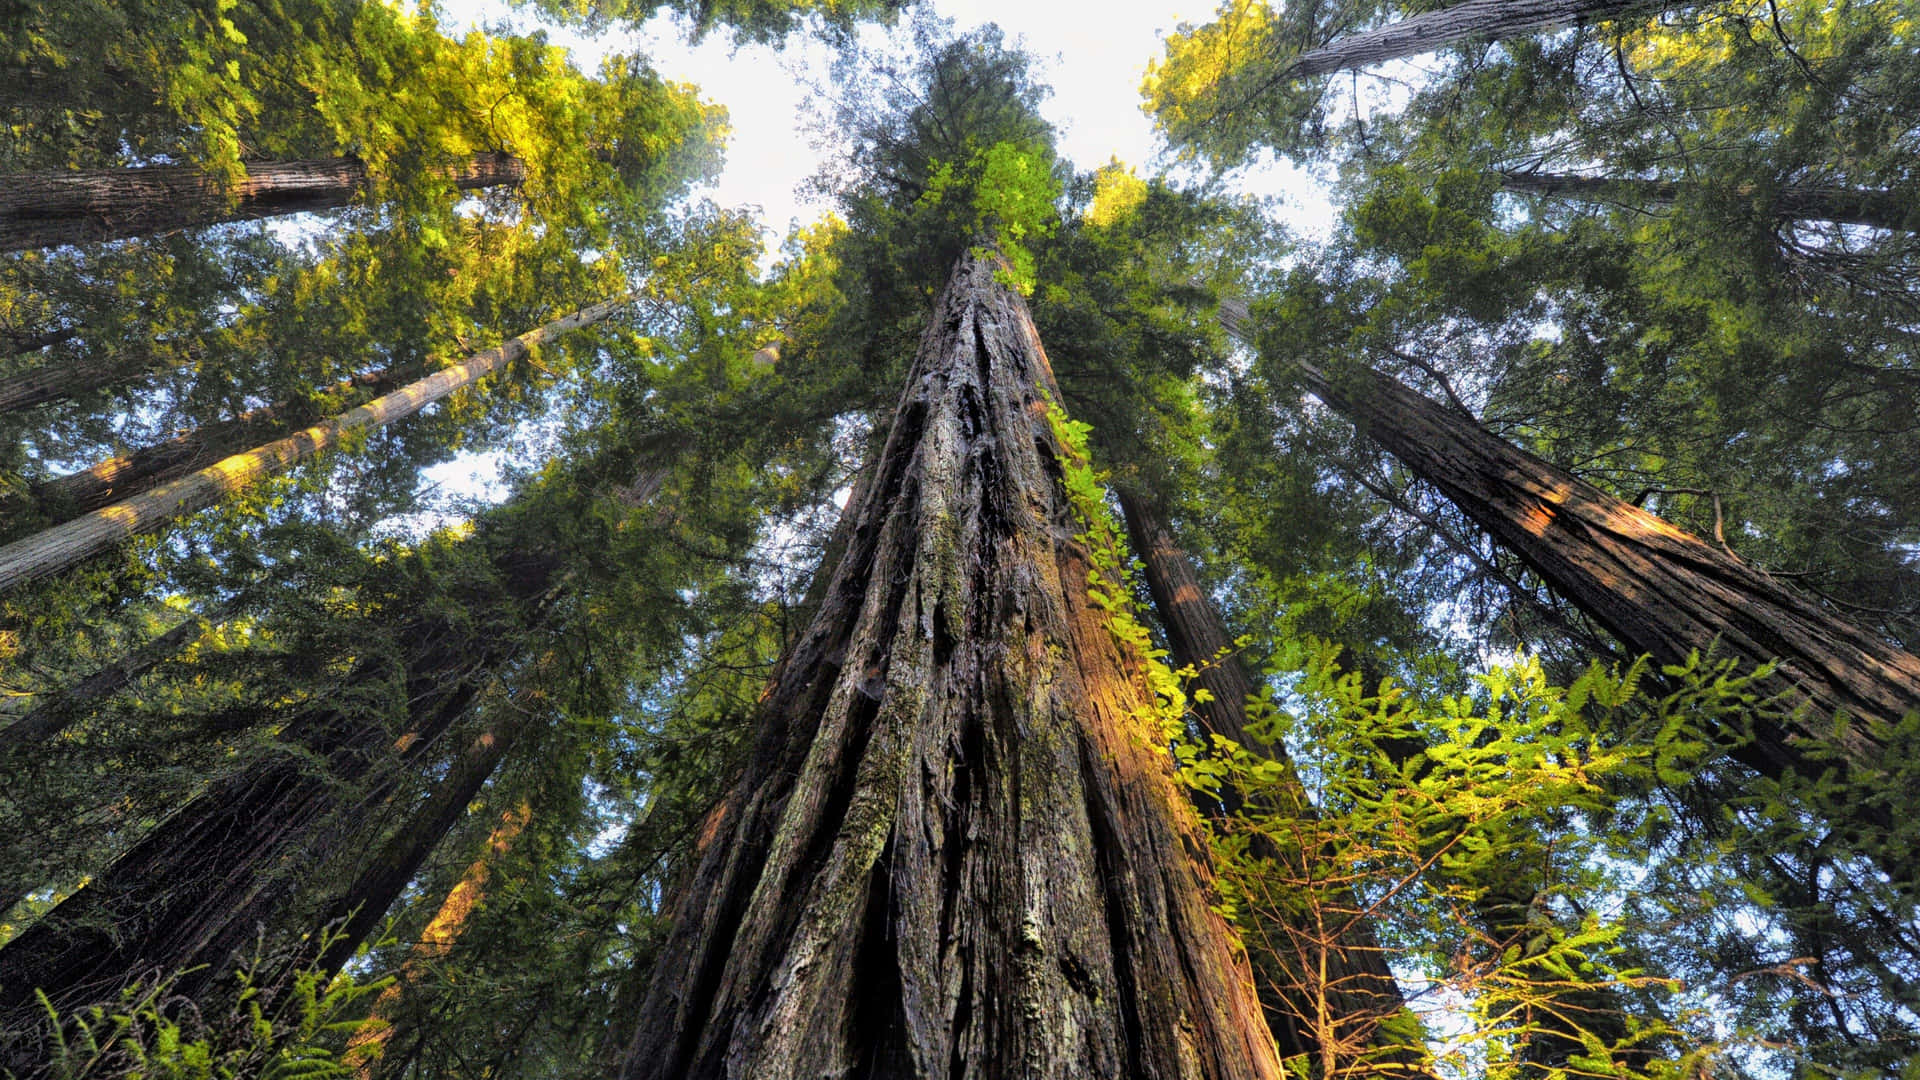 Majestic Redwood Trees in Giant Sequoia National Park